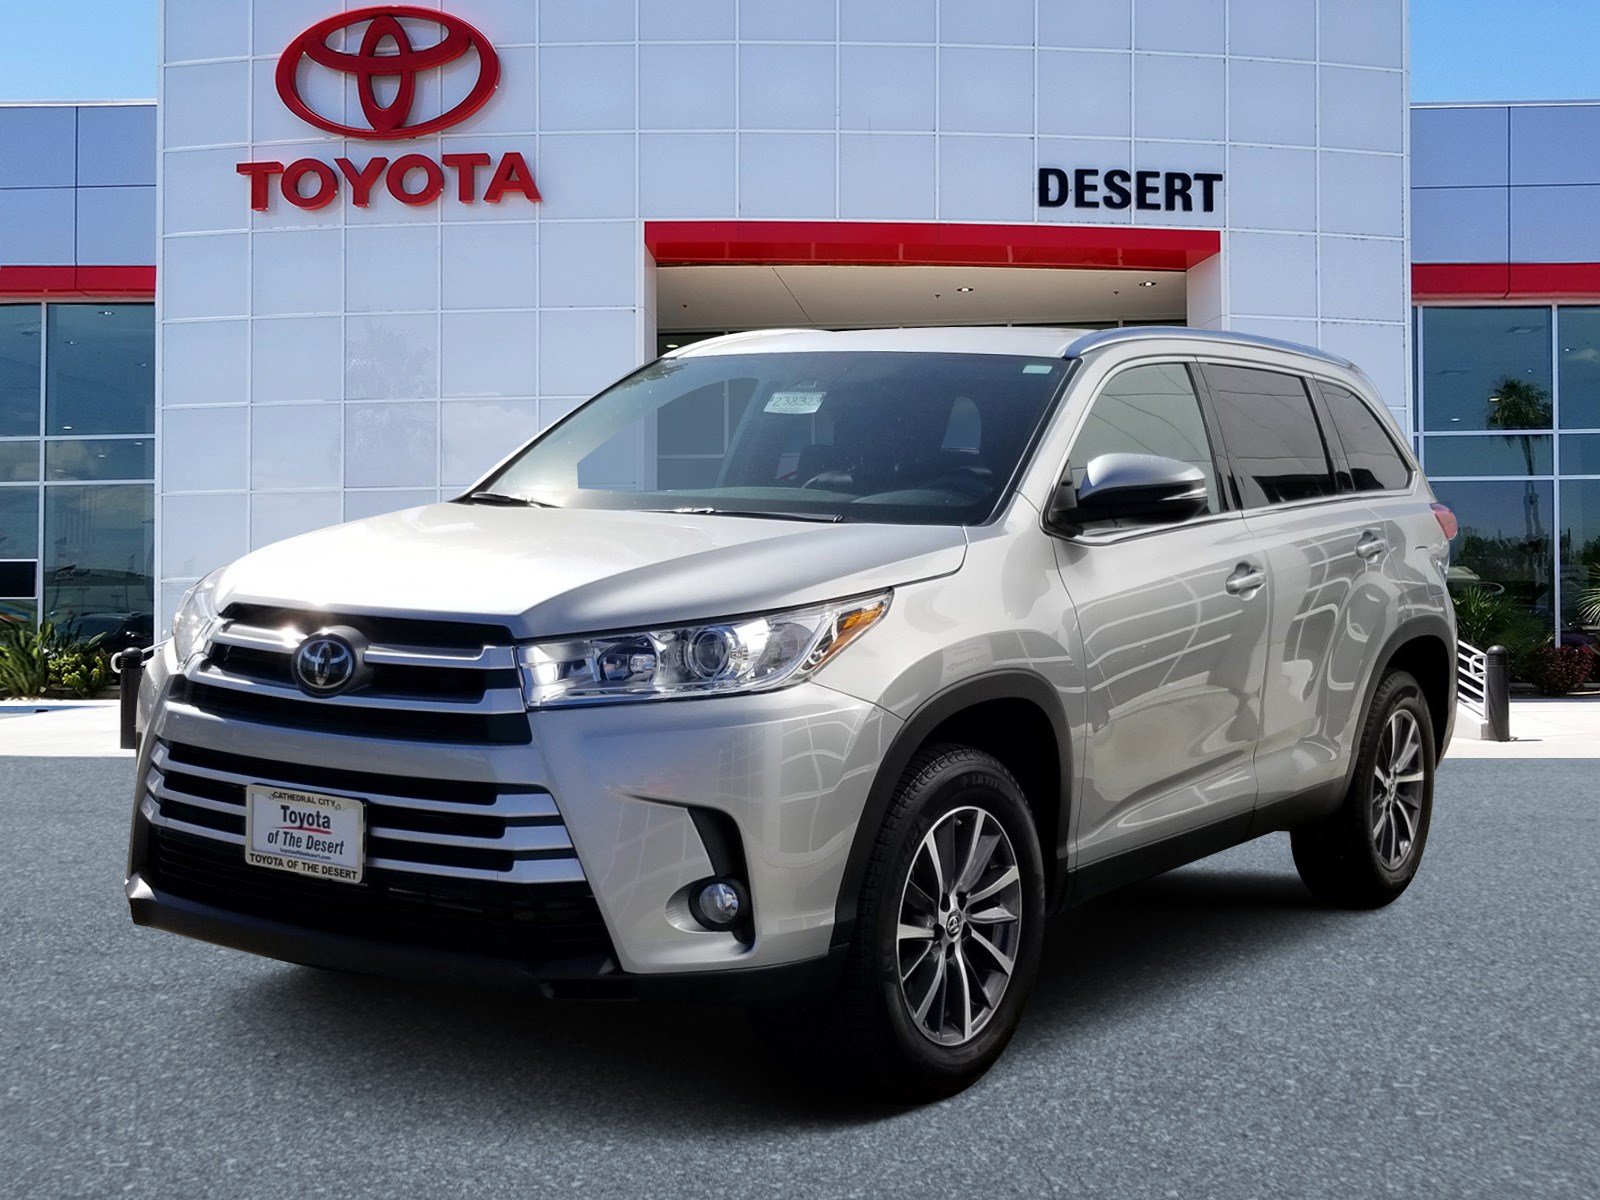 New 2019 Toyota Highlander XLE Sport Utility in Cathedral City 238323 